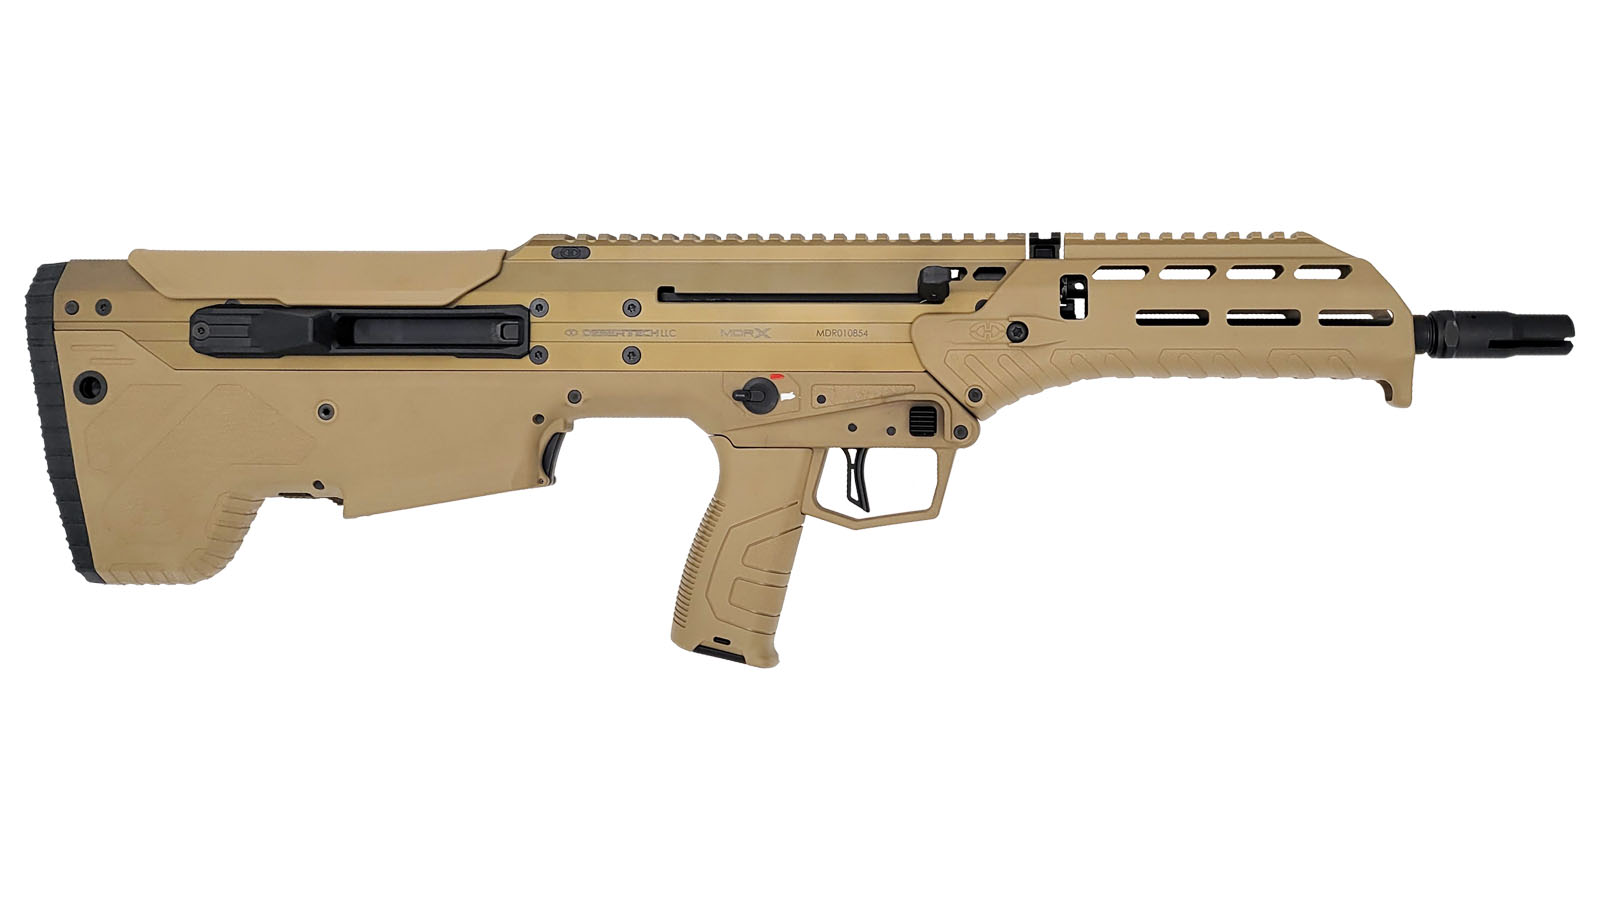 MDRx Rifle, 556NATO 223Rem 16" 10rd Side-Ejection FDE